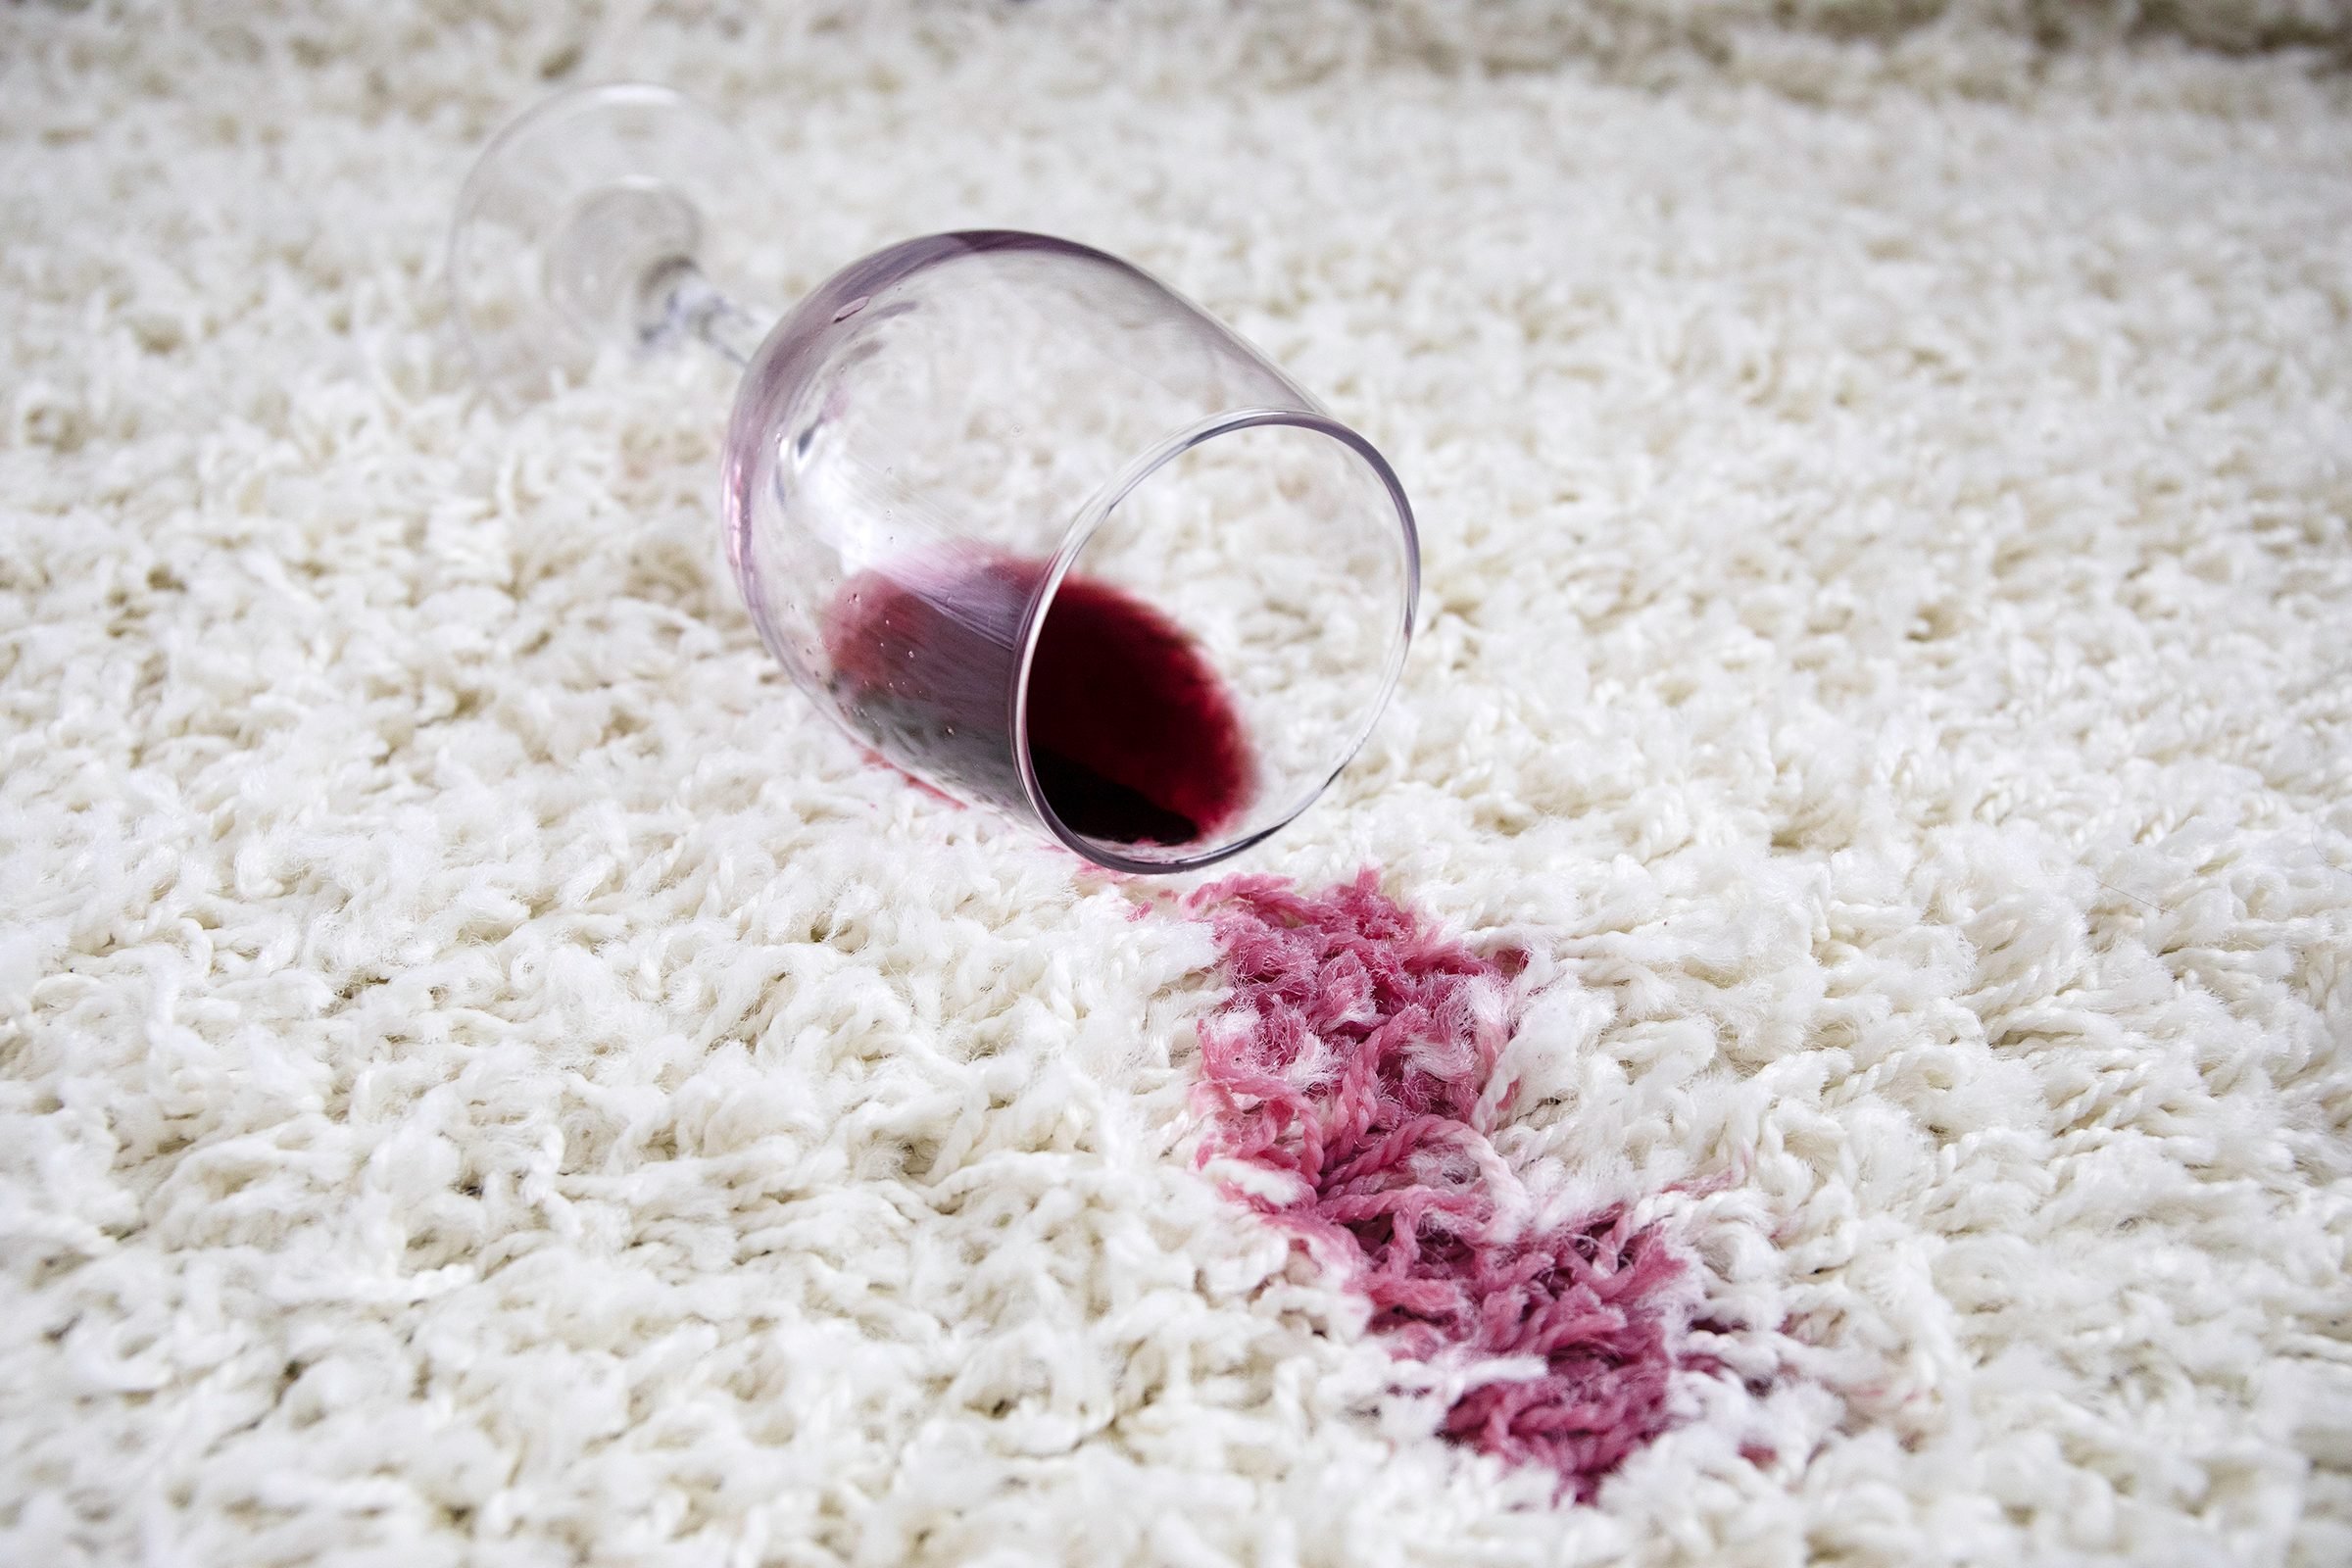 How to clean up after a red wine spill on carpet